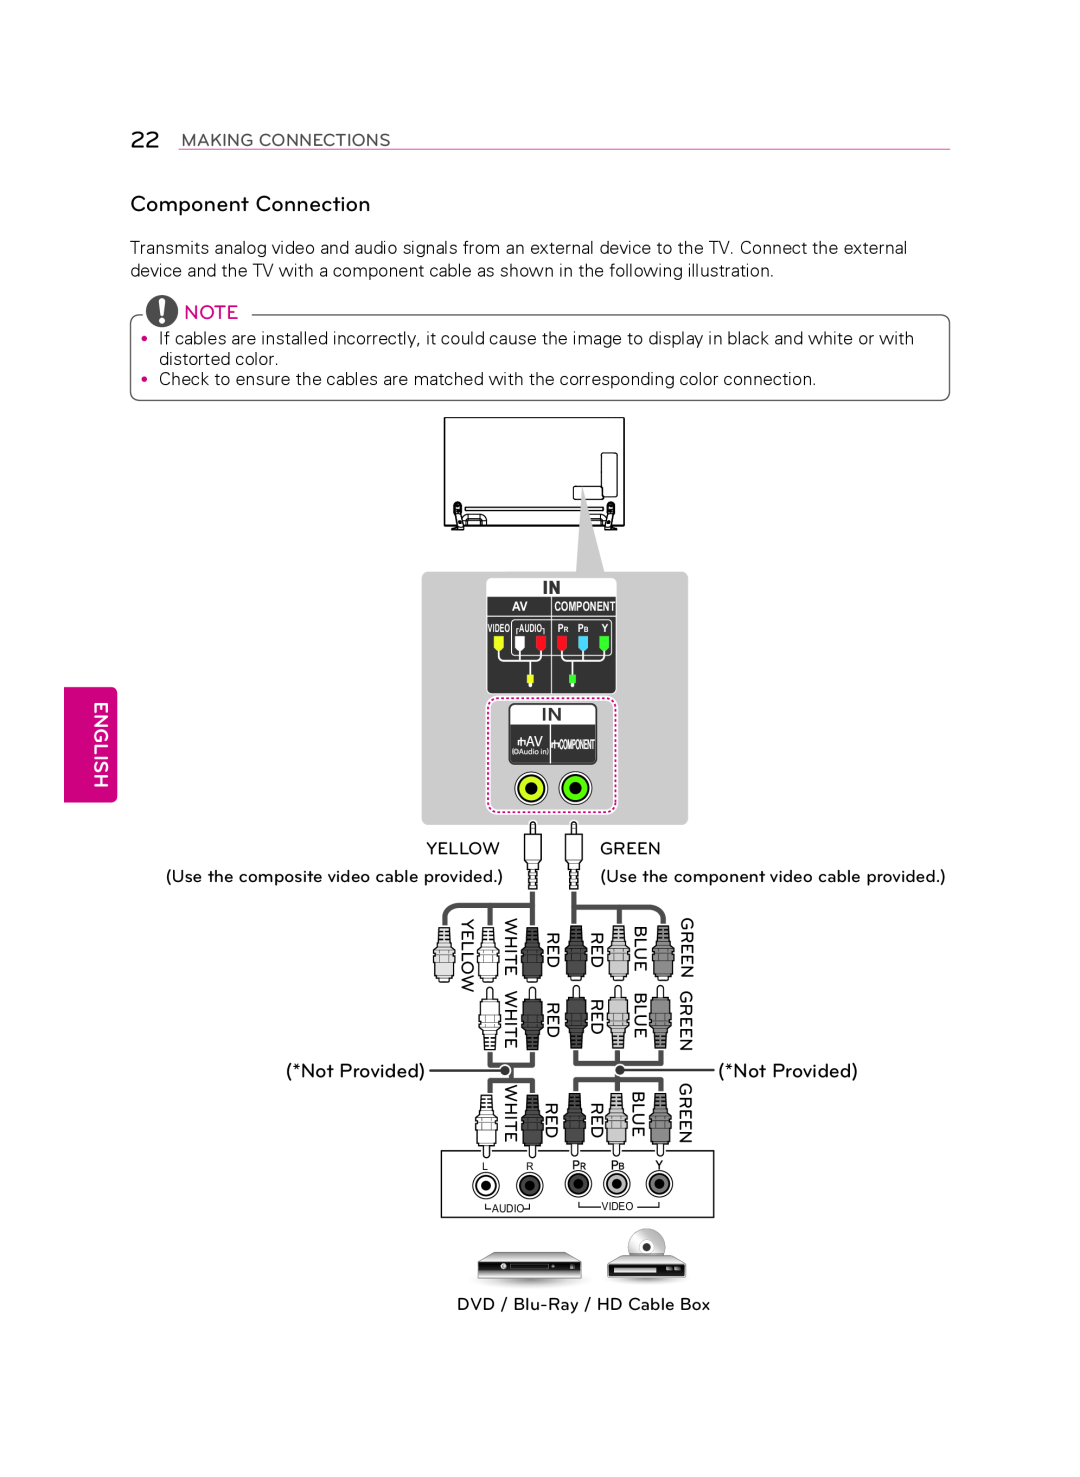 LG Electronics 55LA9650 owner manual Component Connection, English, Making Connections 